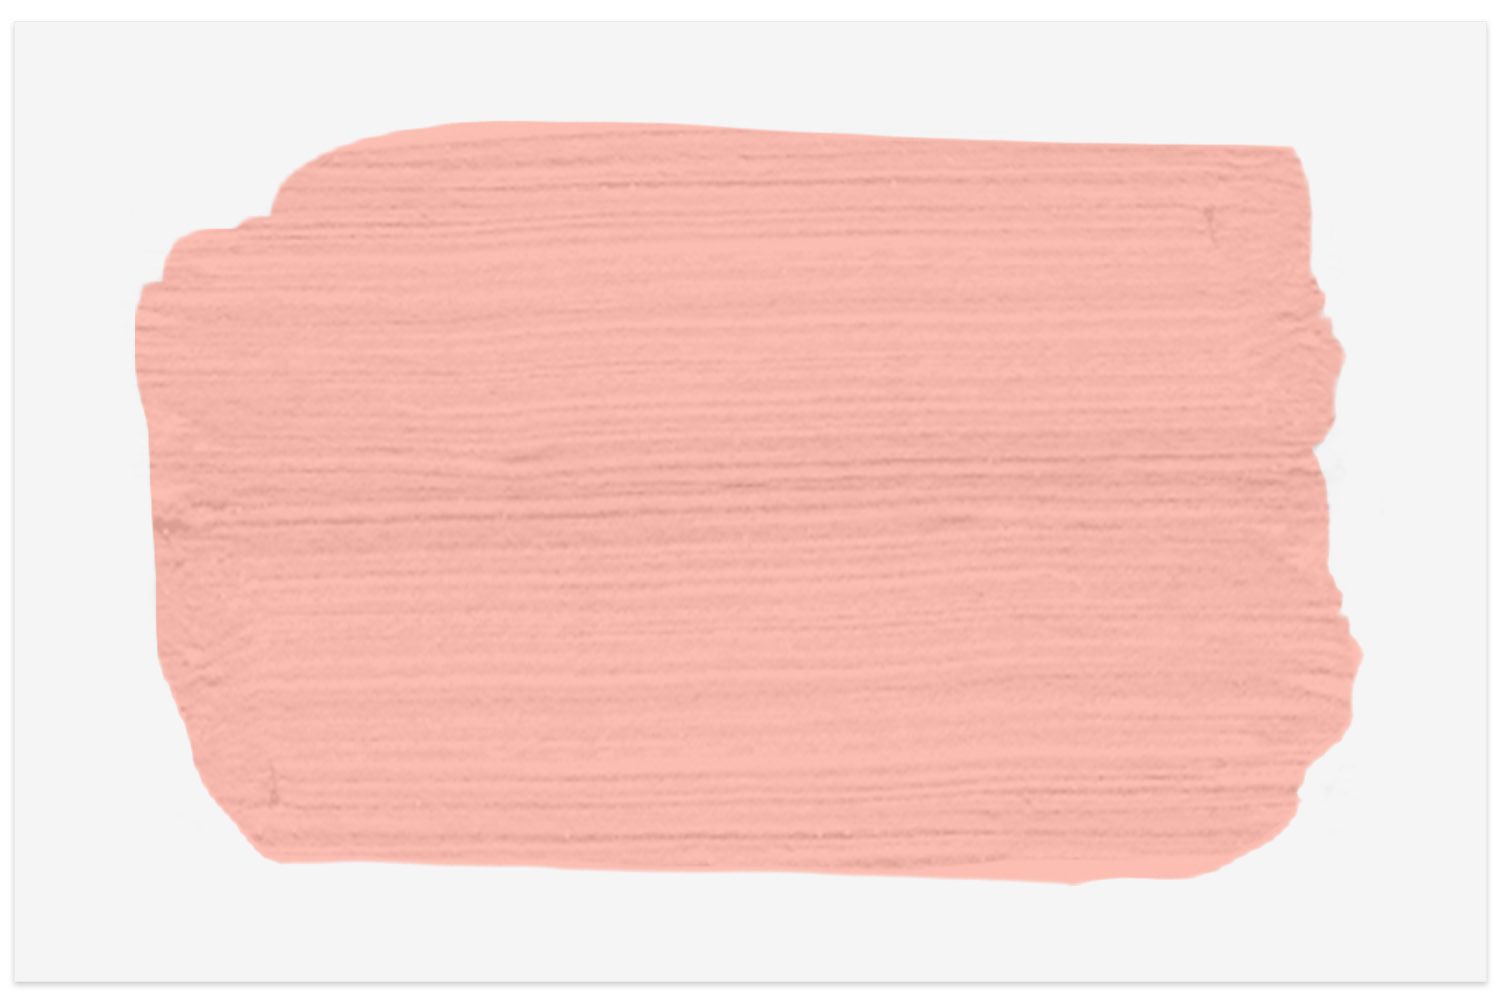 Coral : Pink Canopy paint swatch for little girls' room